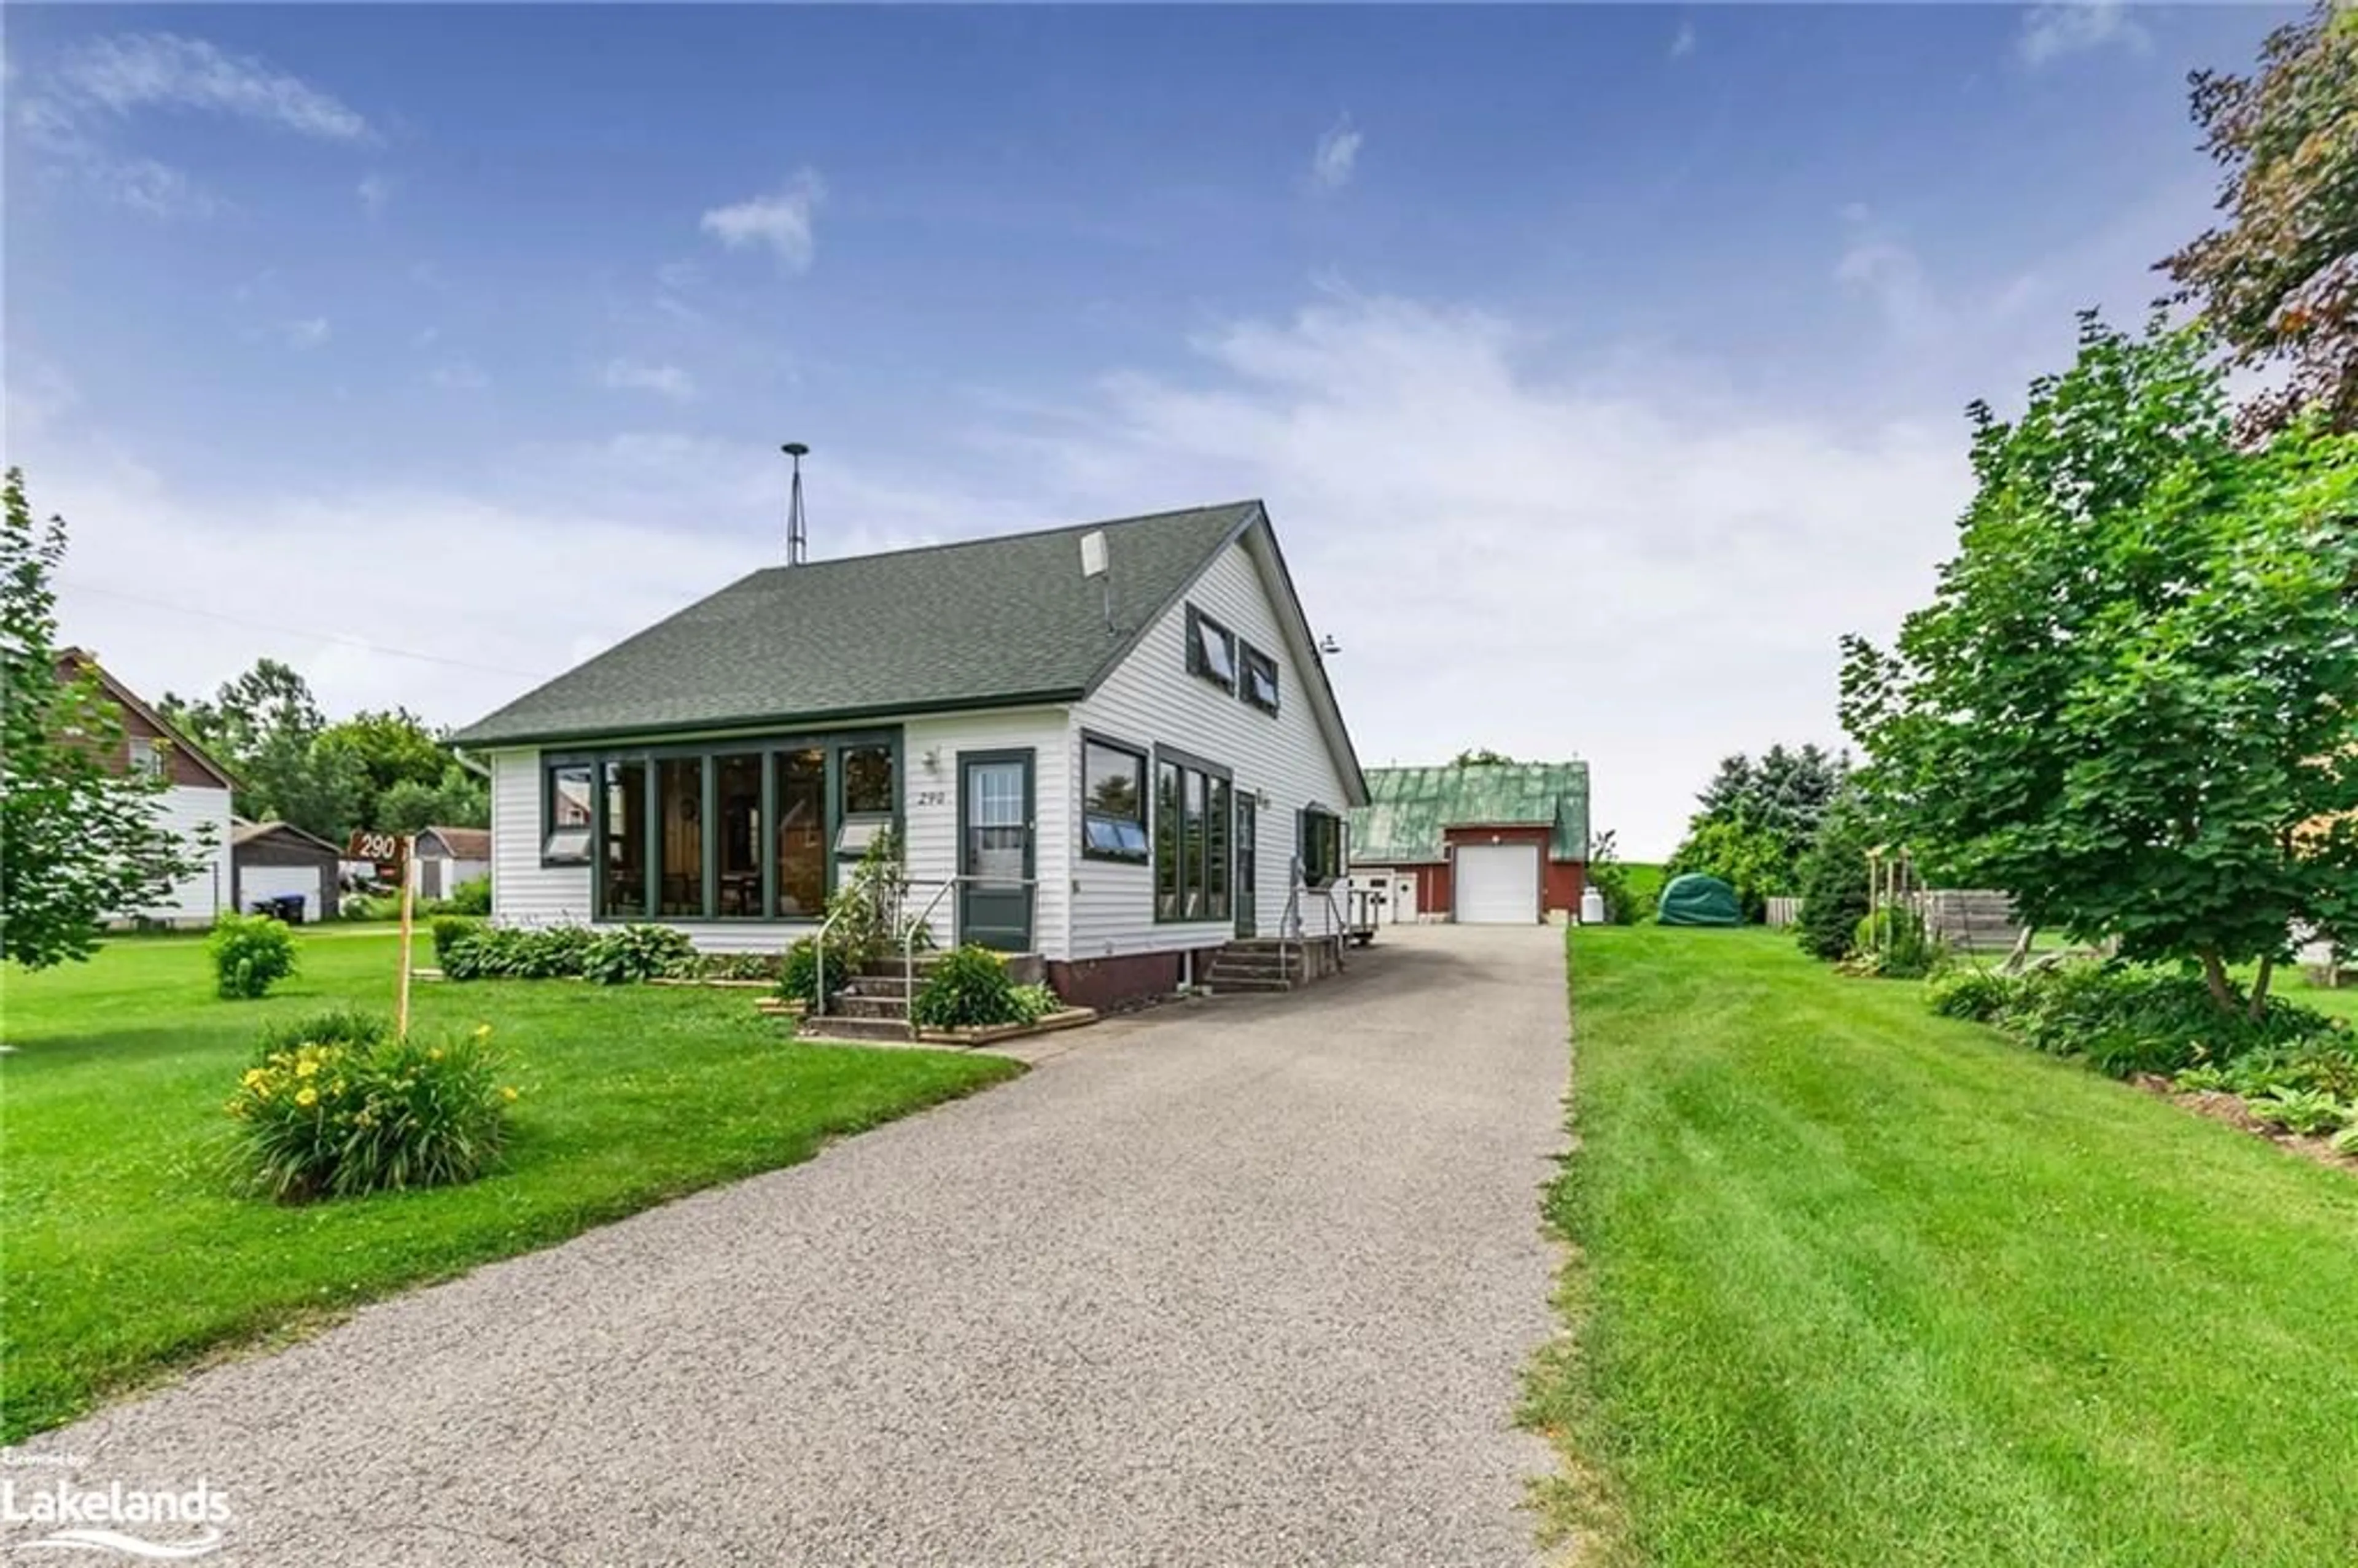 Cottage for 290 Lafontaine Rd, Tiny Ontario L9M 1R3